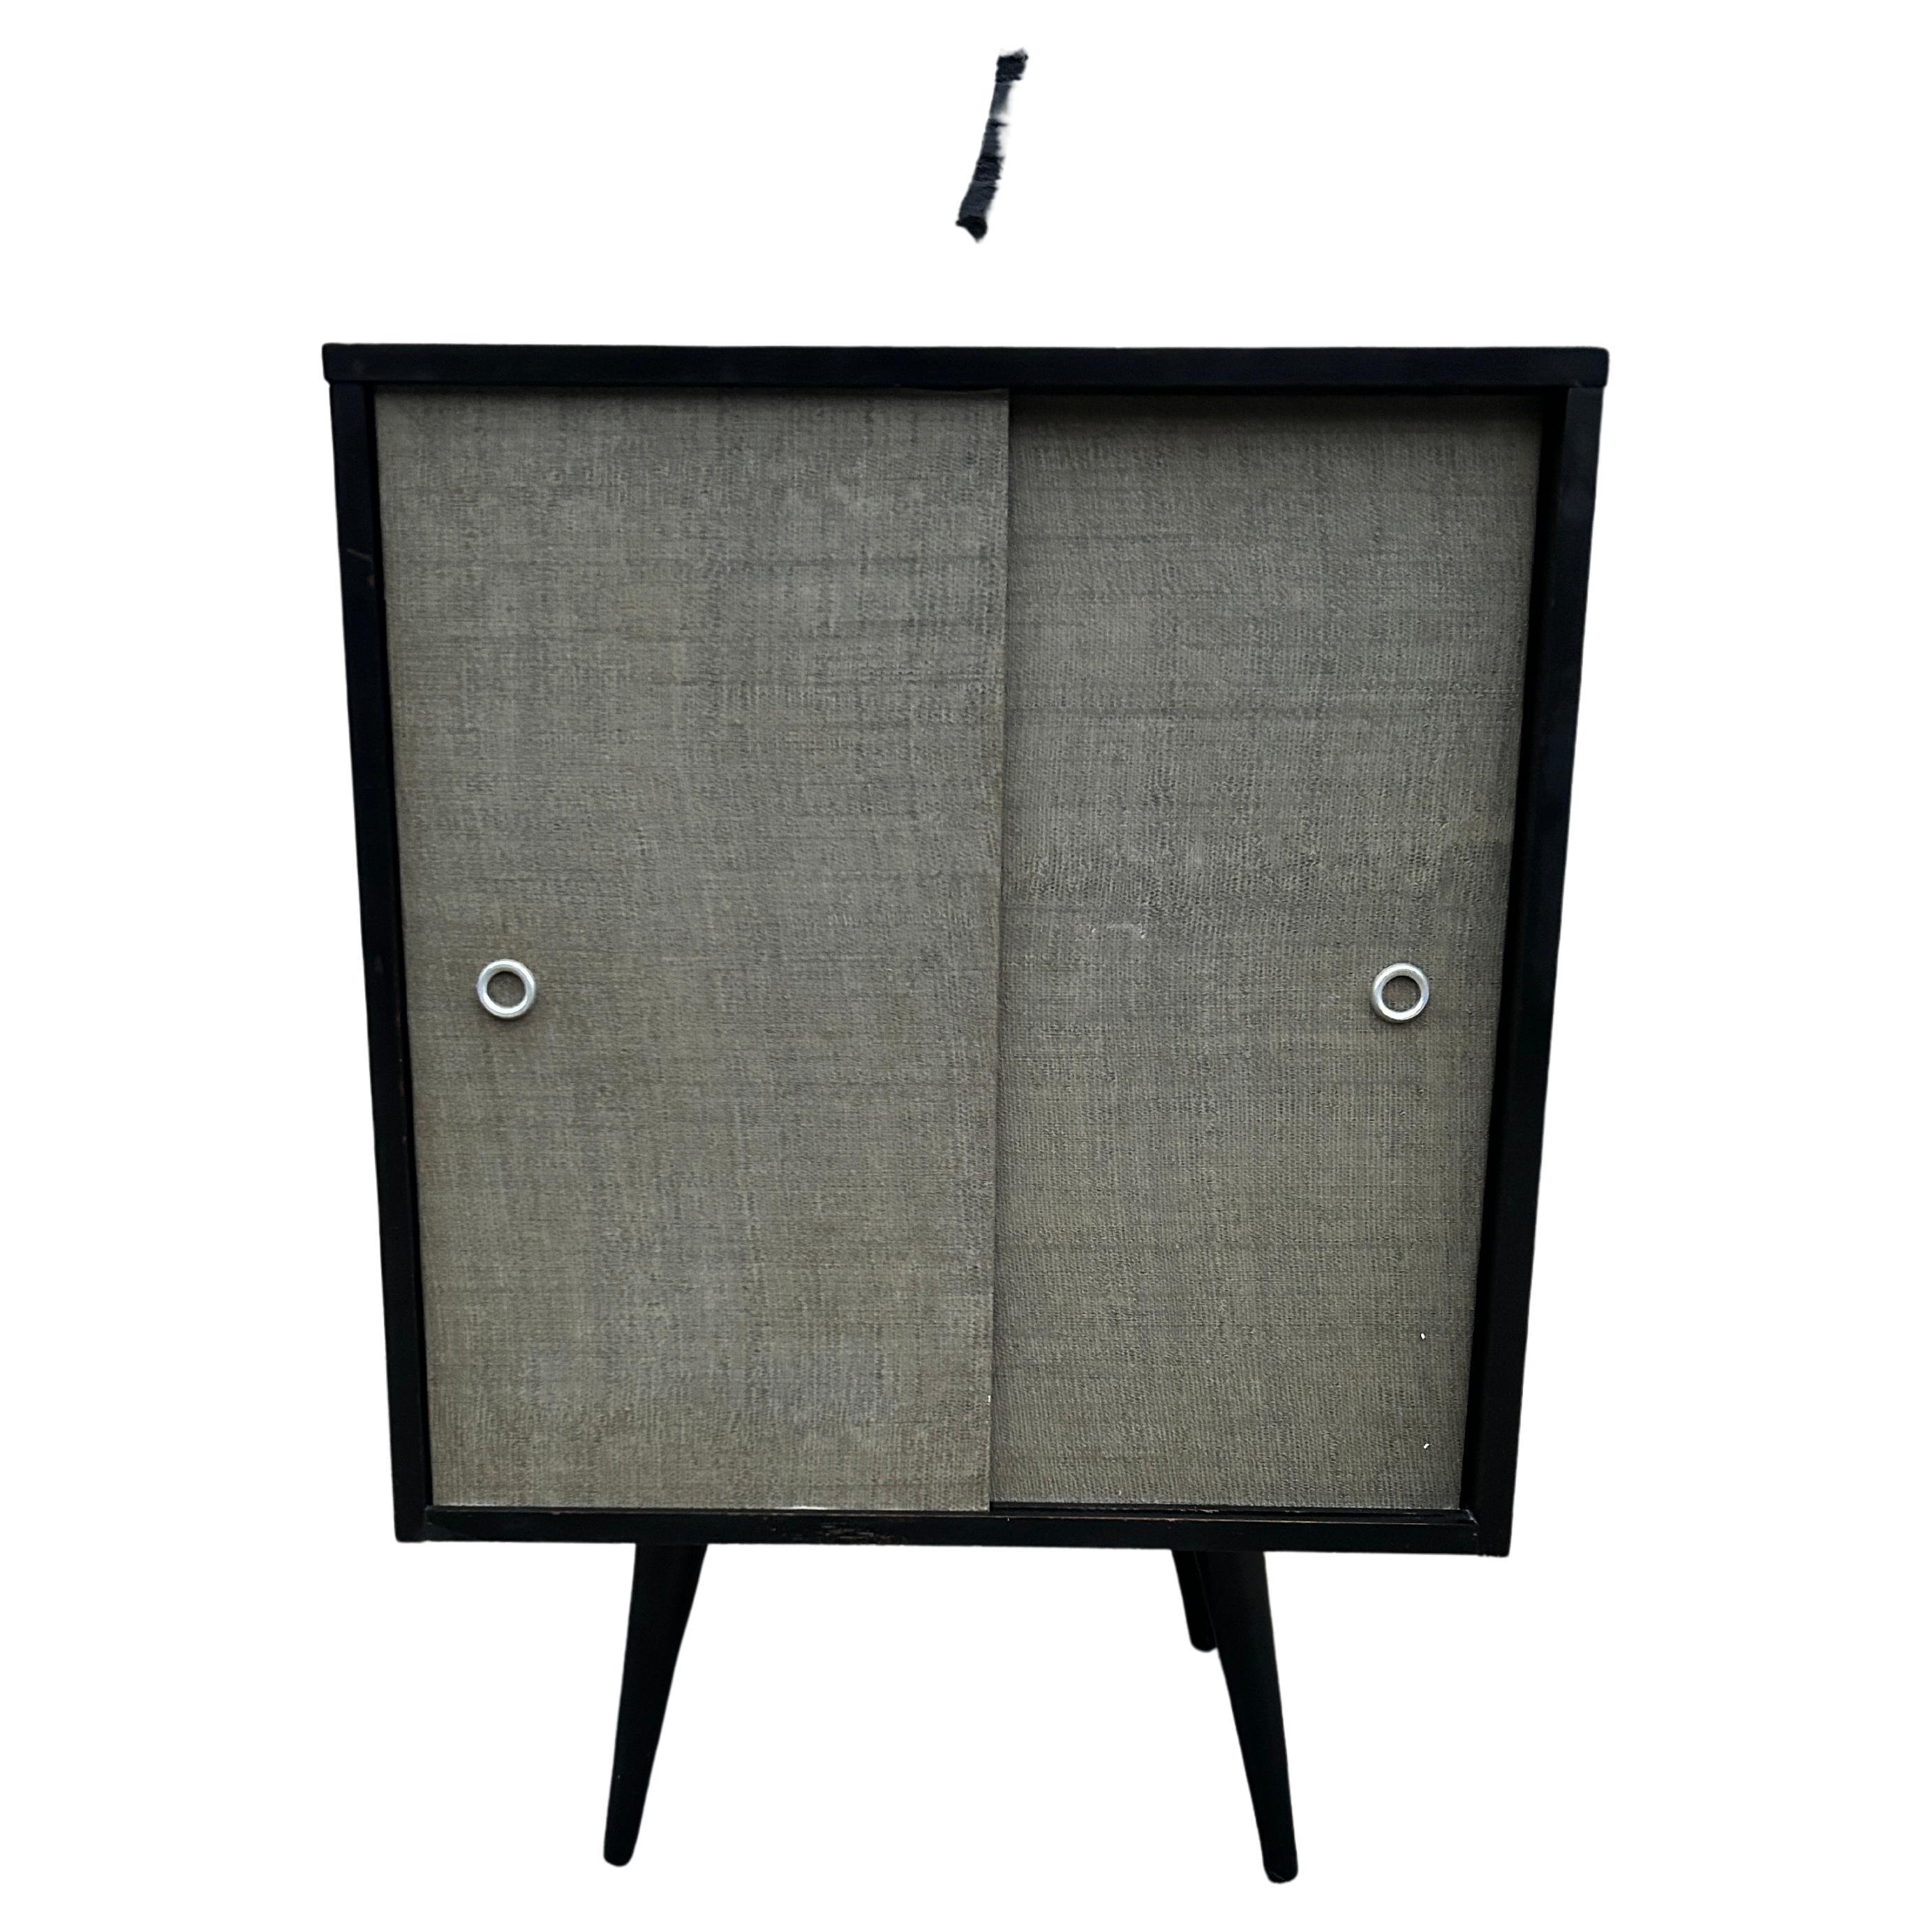 Beautiful mid-century small cabinet by Paul McCobb circa 1950 planner group #1512 has 1 fixed shelf - solid maple construction has original black lacquer finish. Has original seaweed light green sliding front doors with aluminum pulls sits on 4